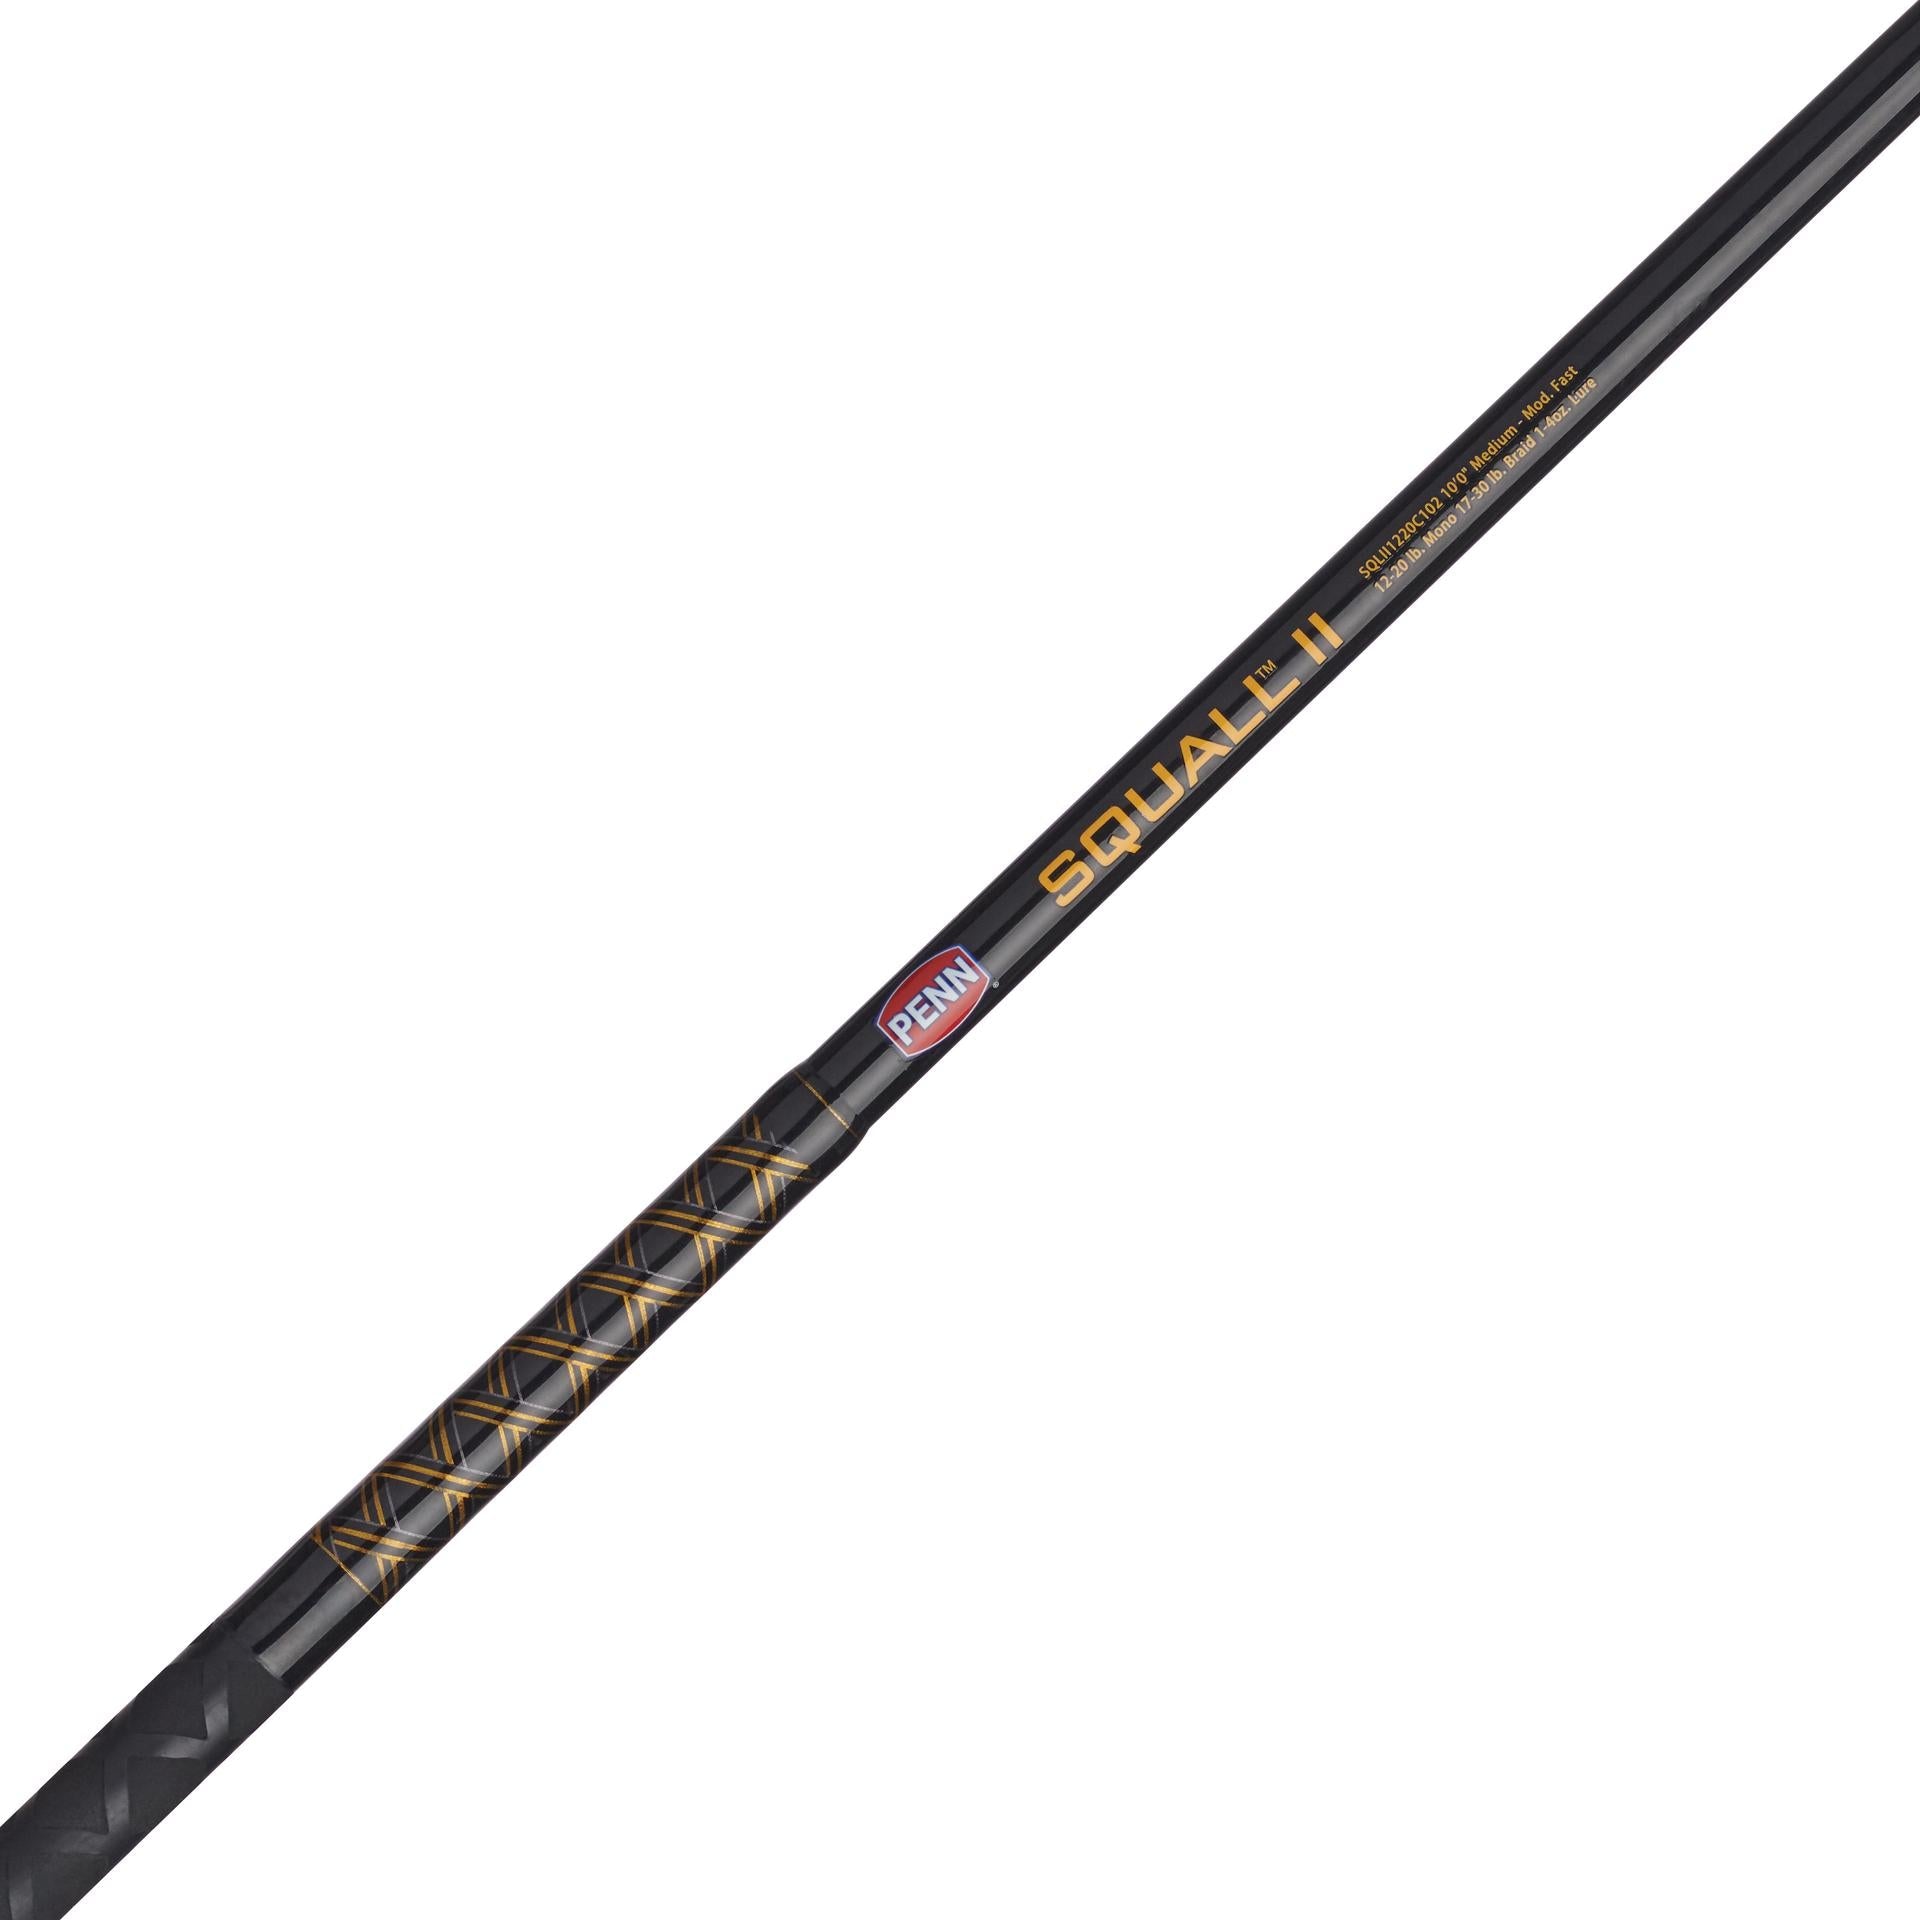 Squall® II Conventional Rod & Reel Combo